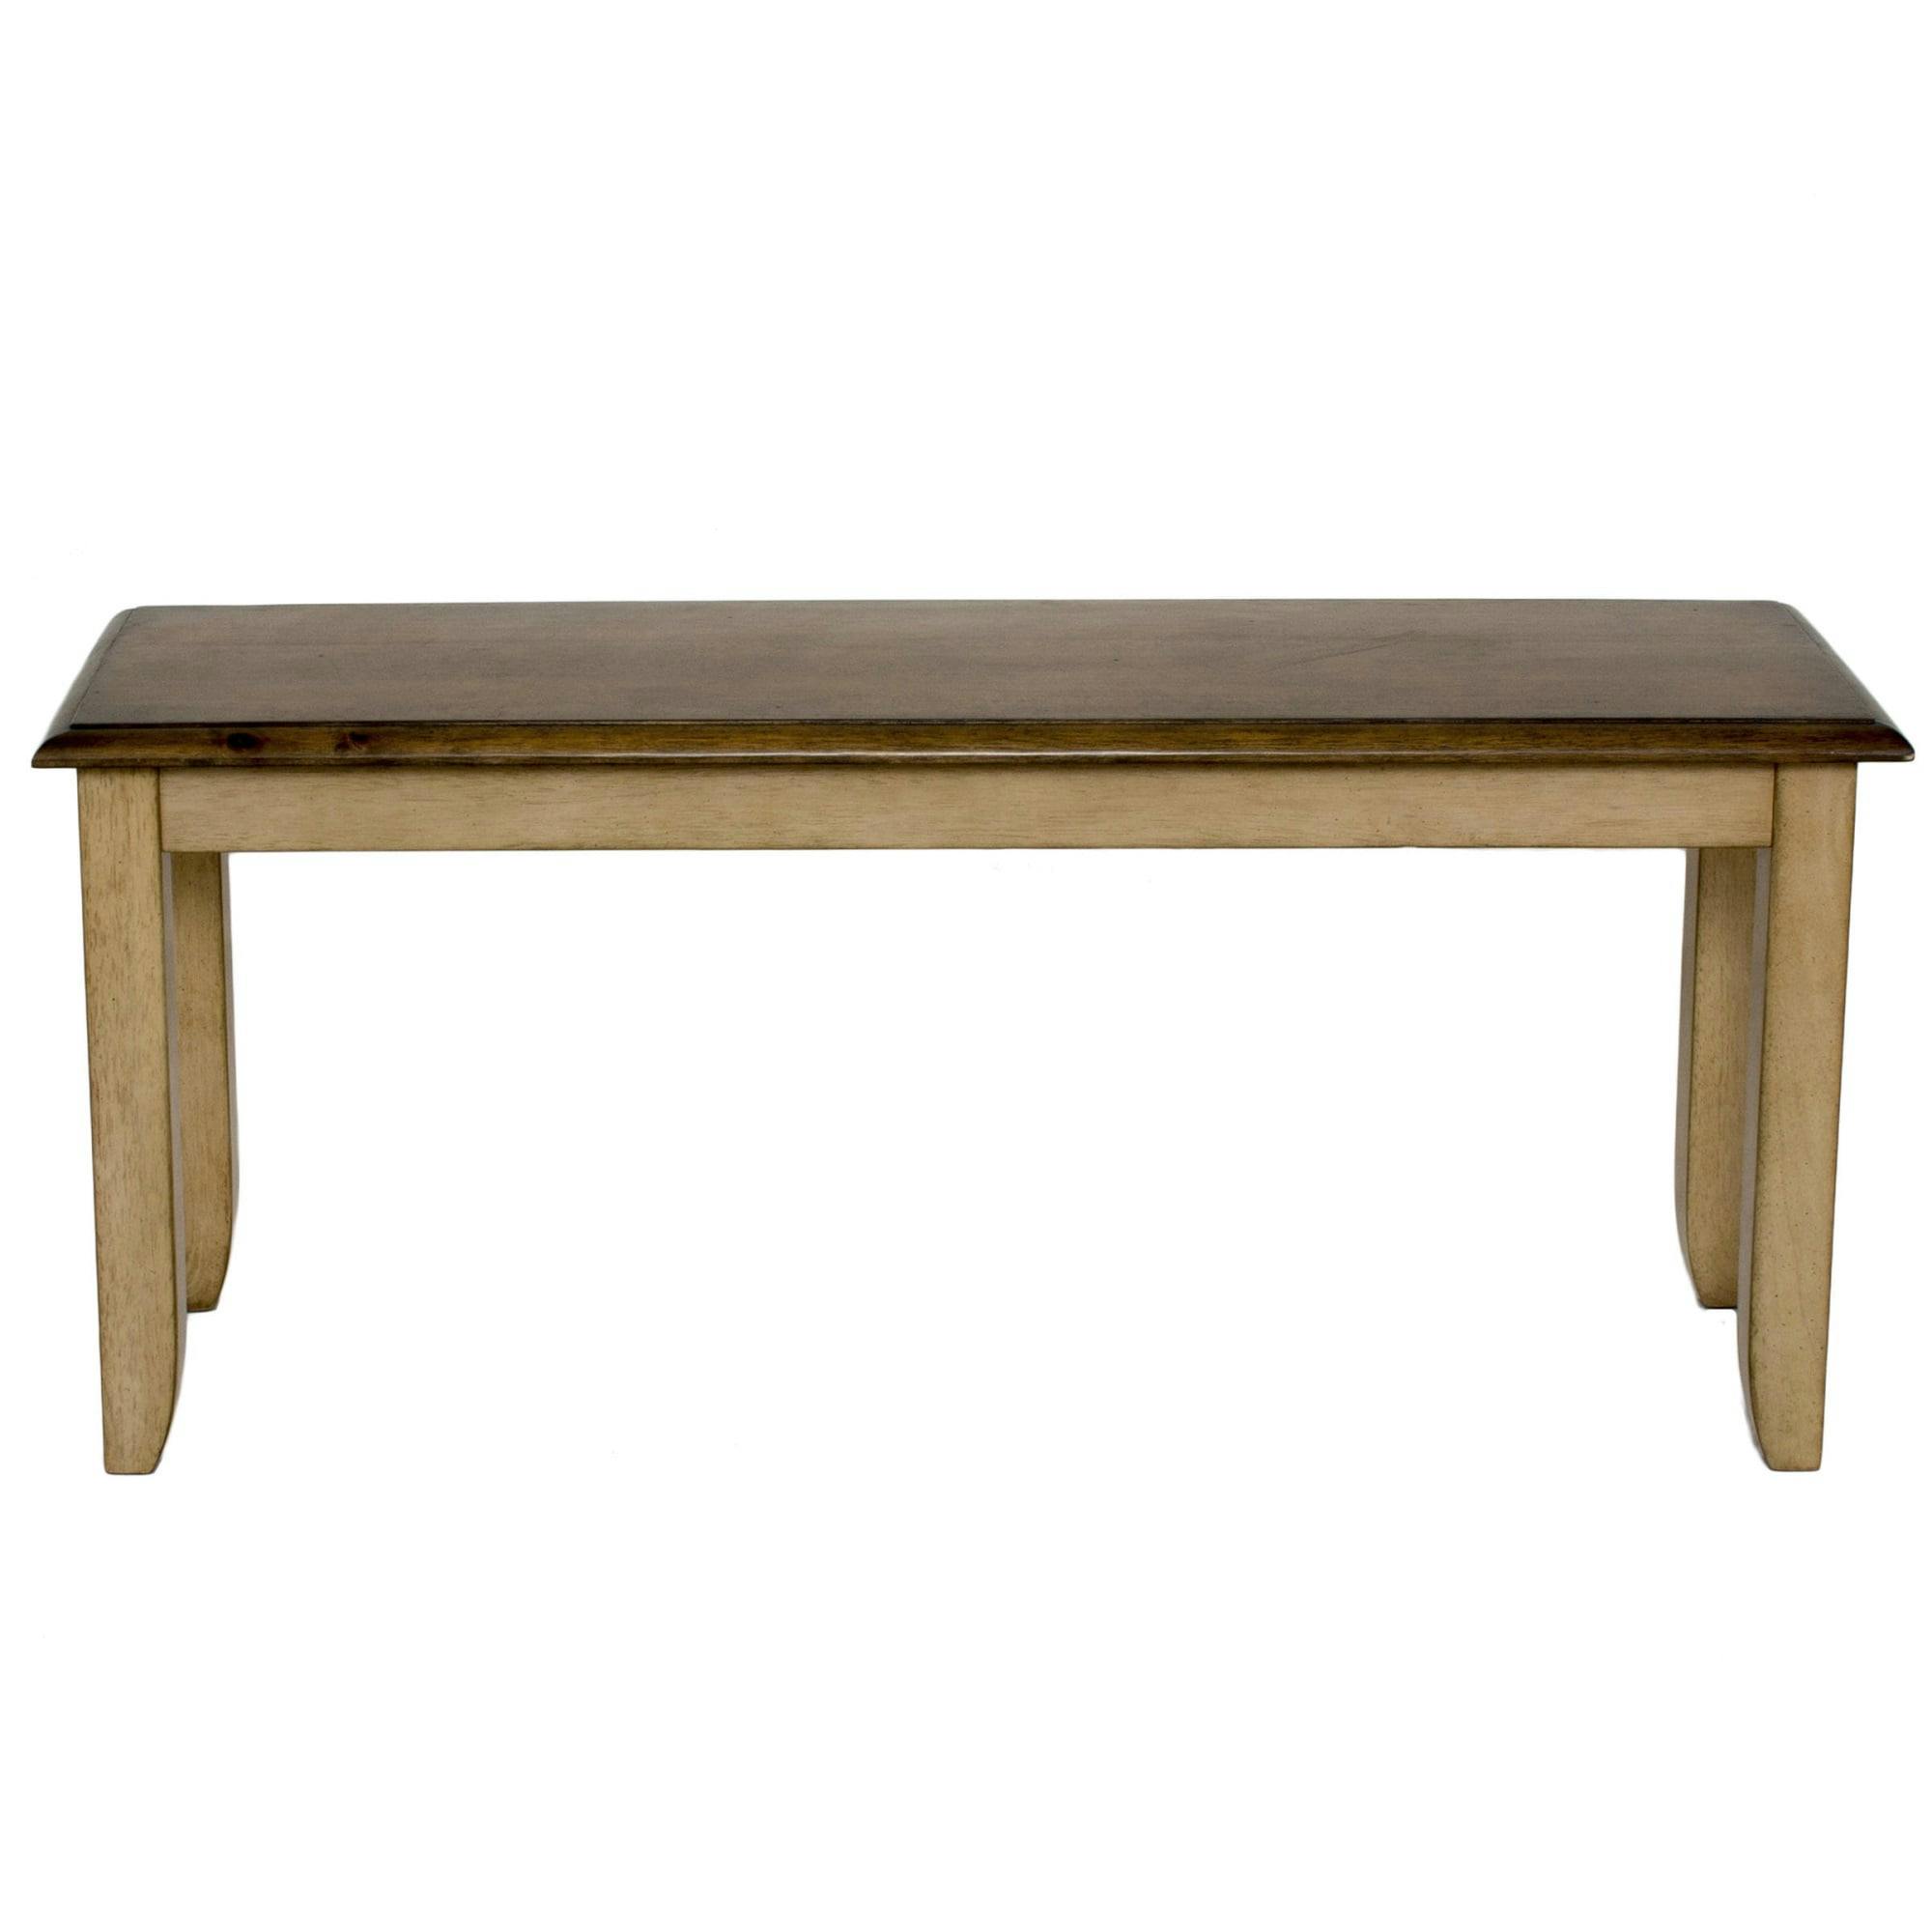 Brook 42" Farmhouse Wood Dining Bench in Light Cream/Warm Brown